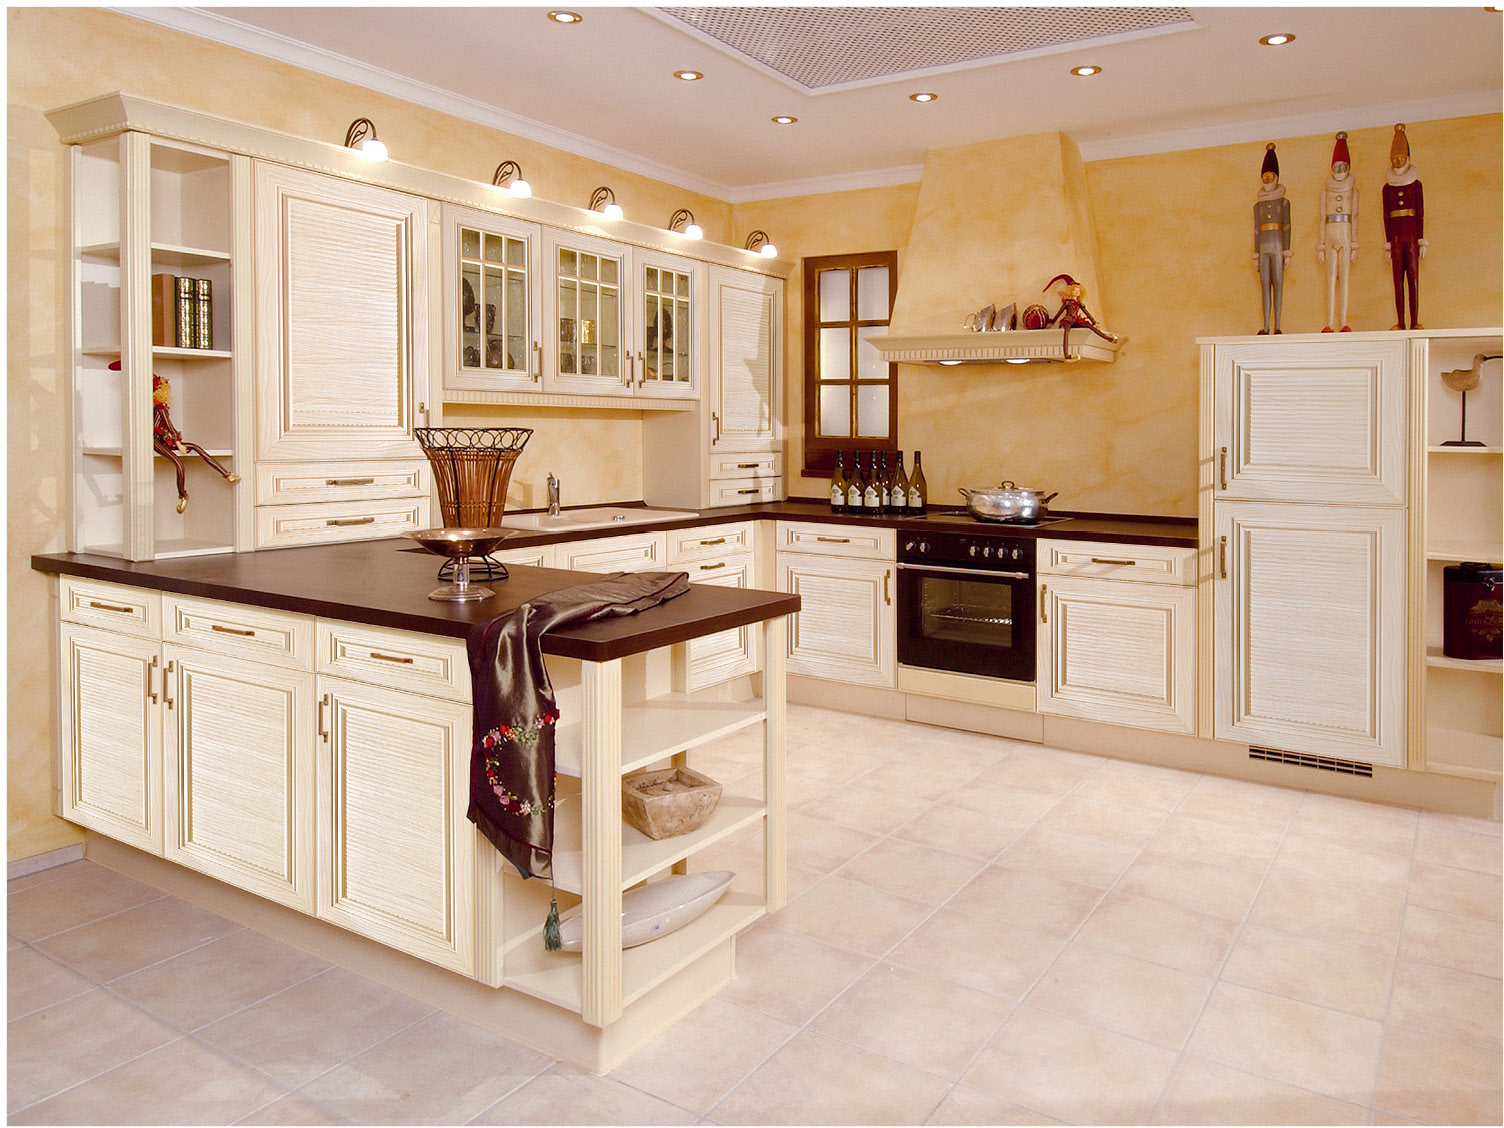 High-End Practical Simple and Durable Modular PVC Kitchen Cabinet Furniture